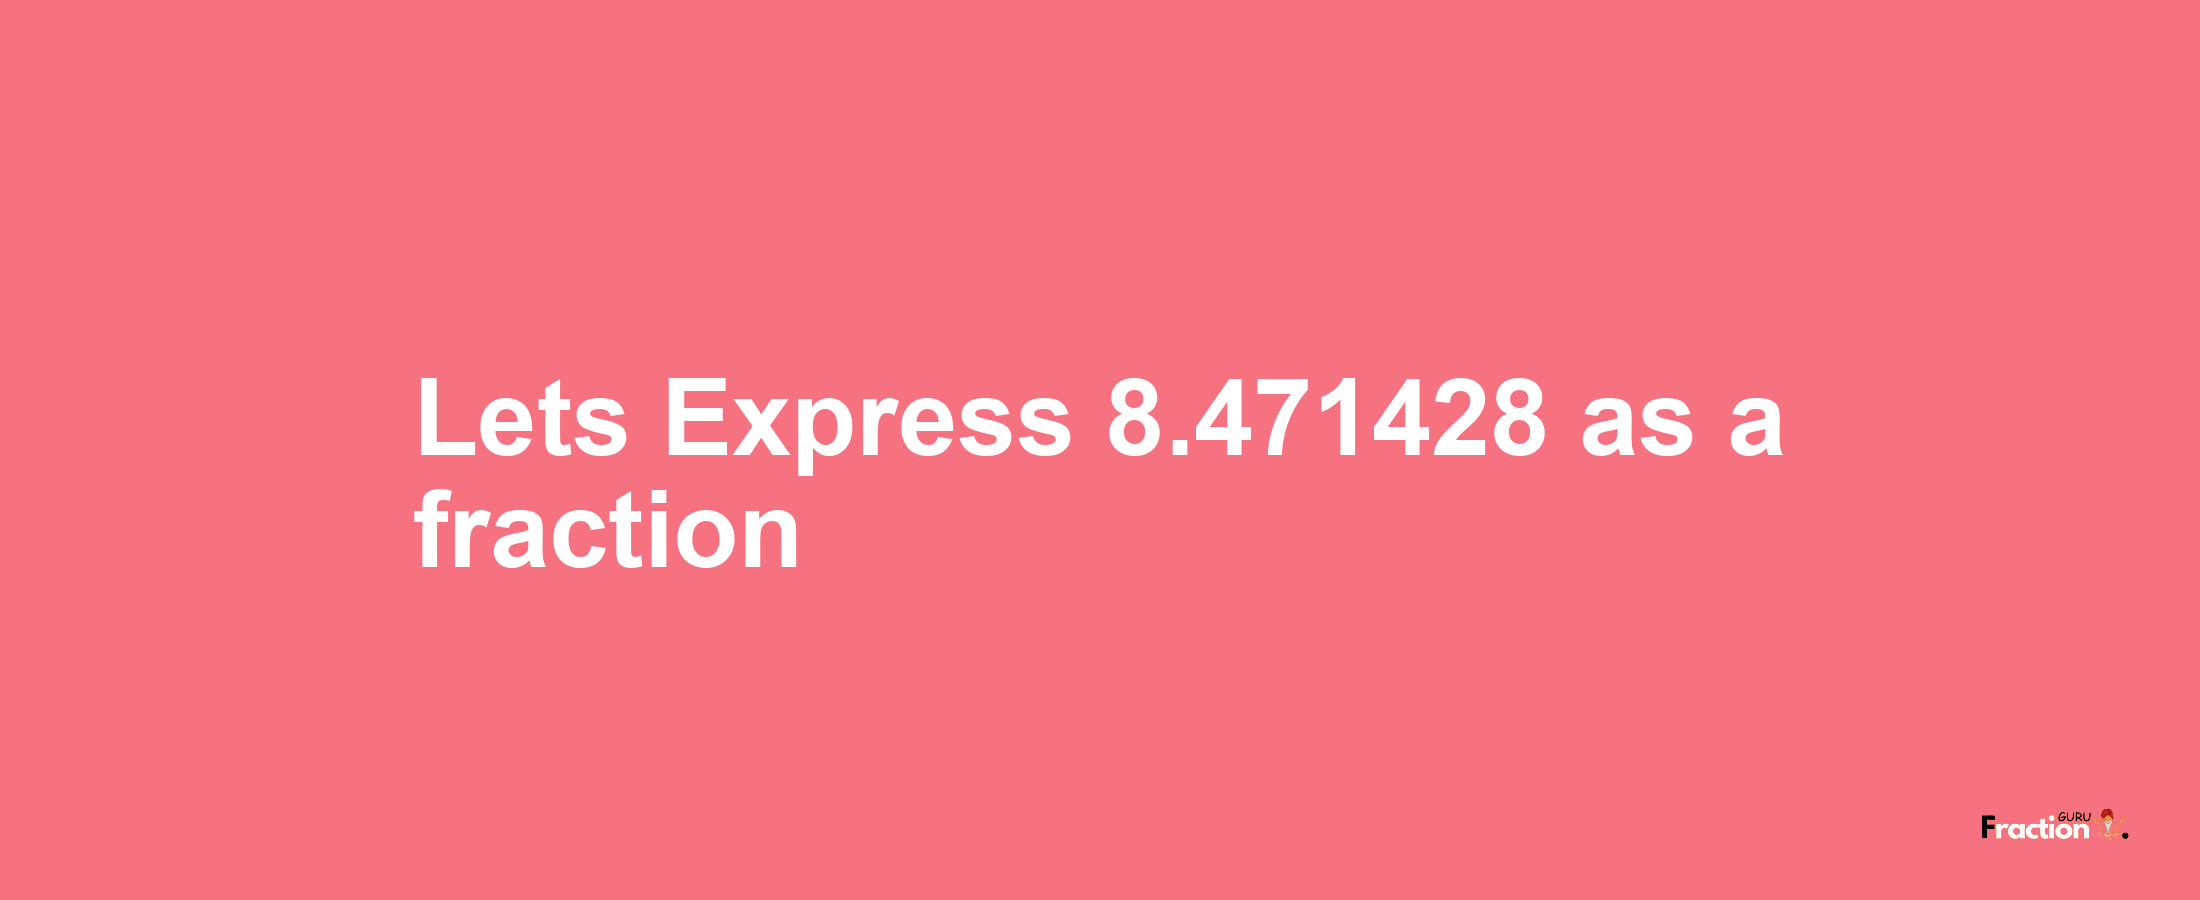 Lets Express 8.471428 as afraction